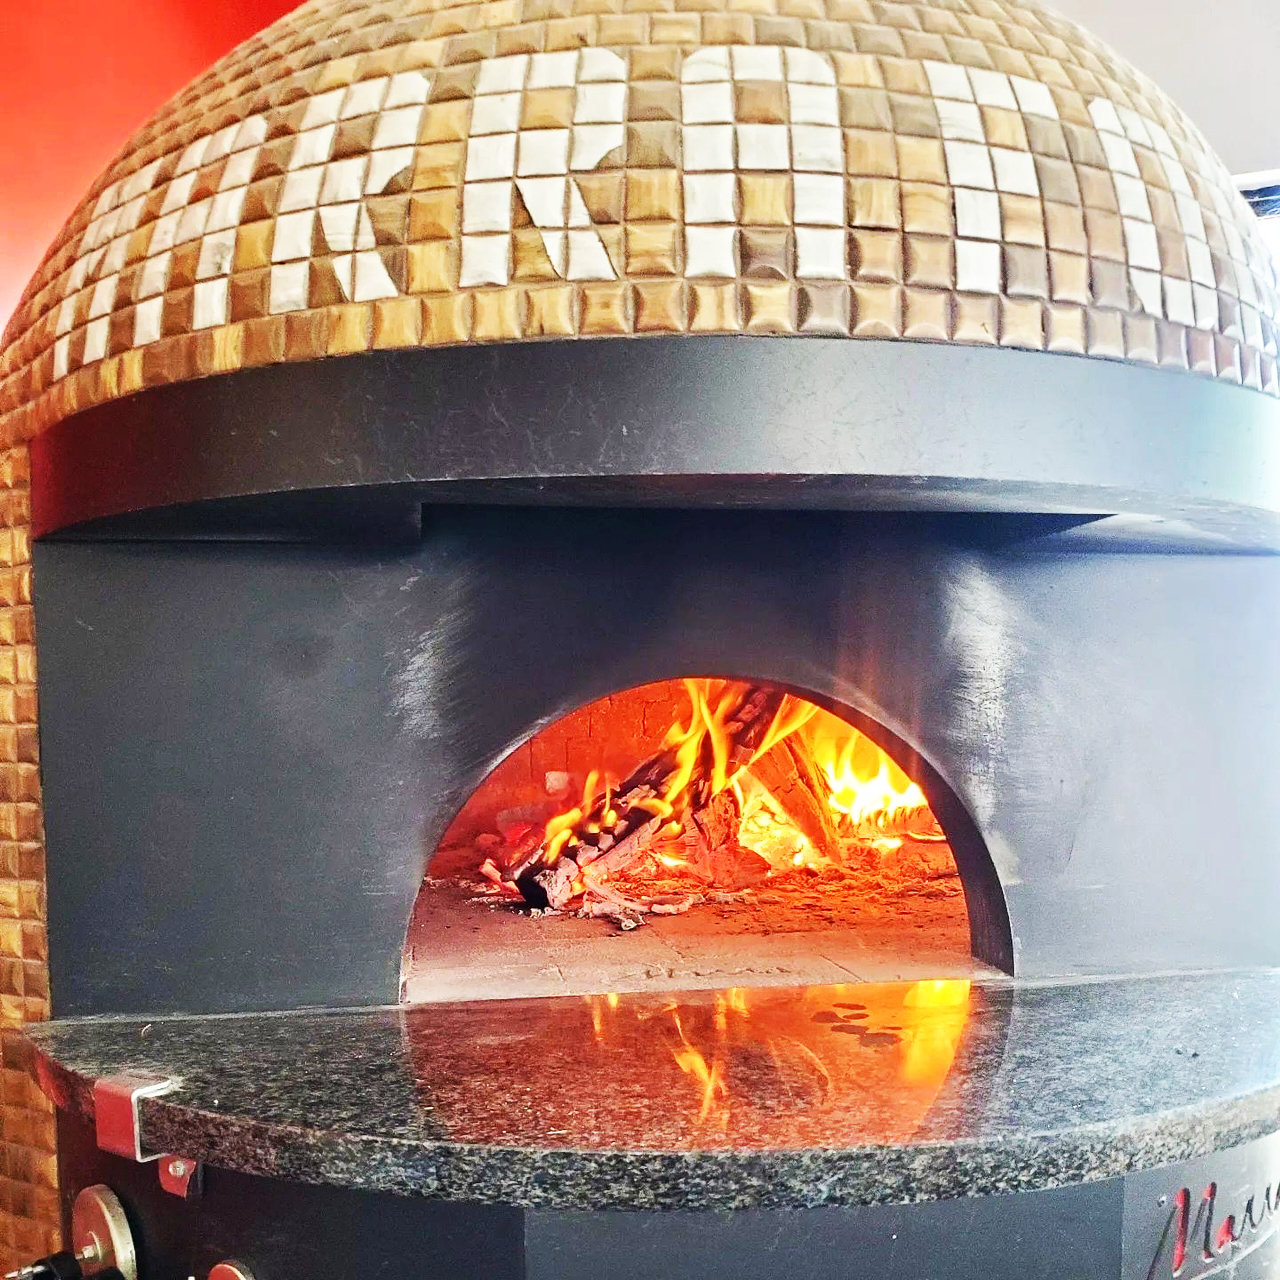 The brick oven gets a workout.